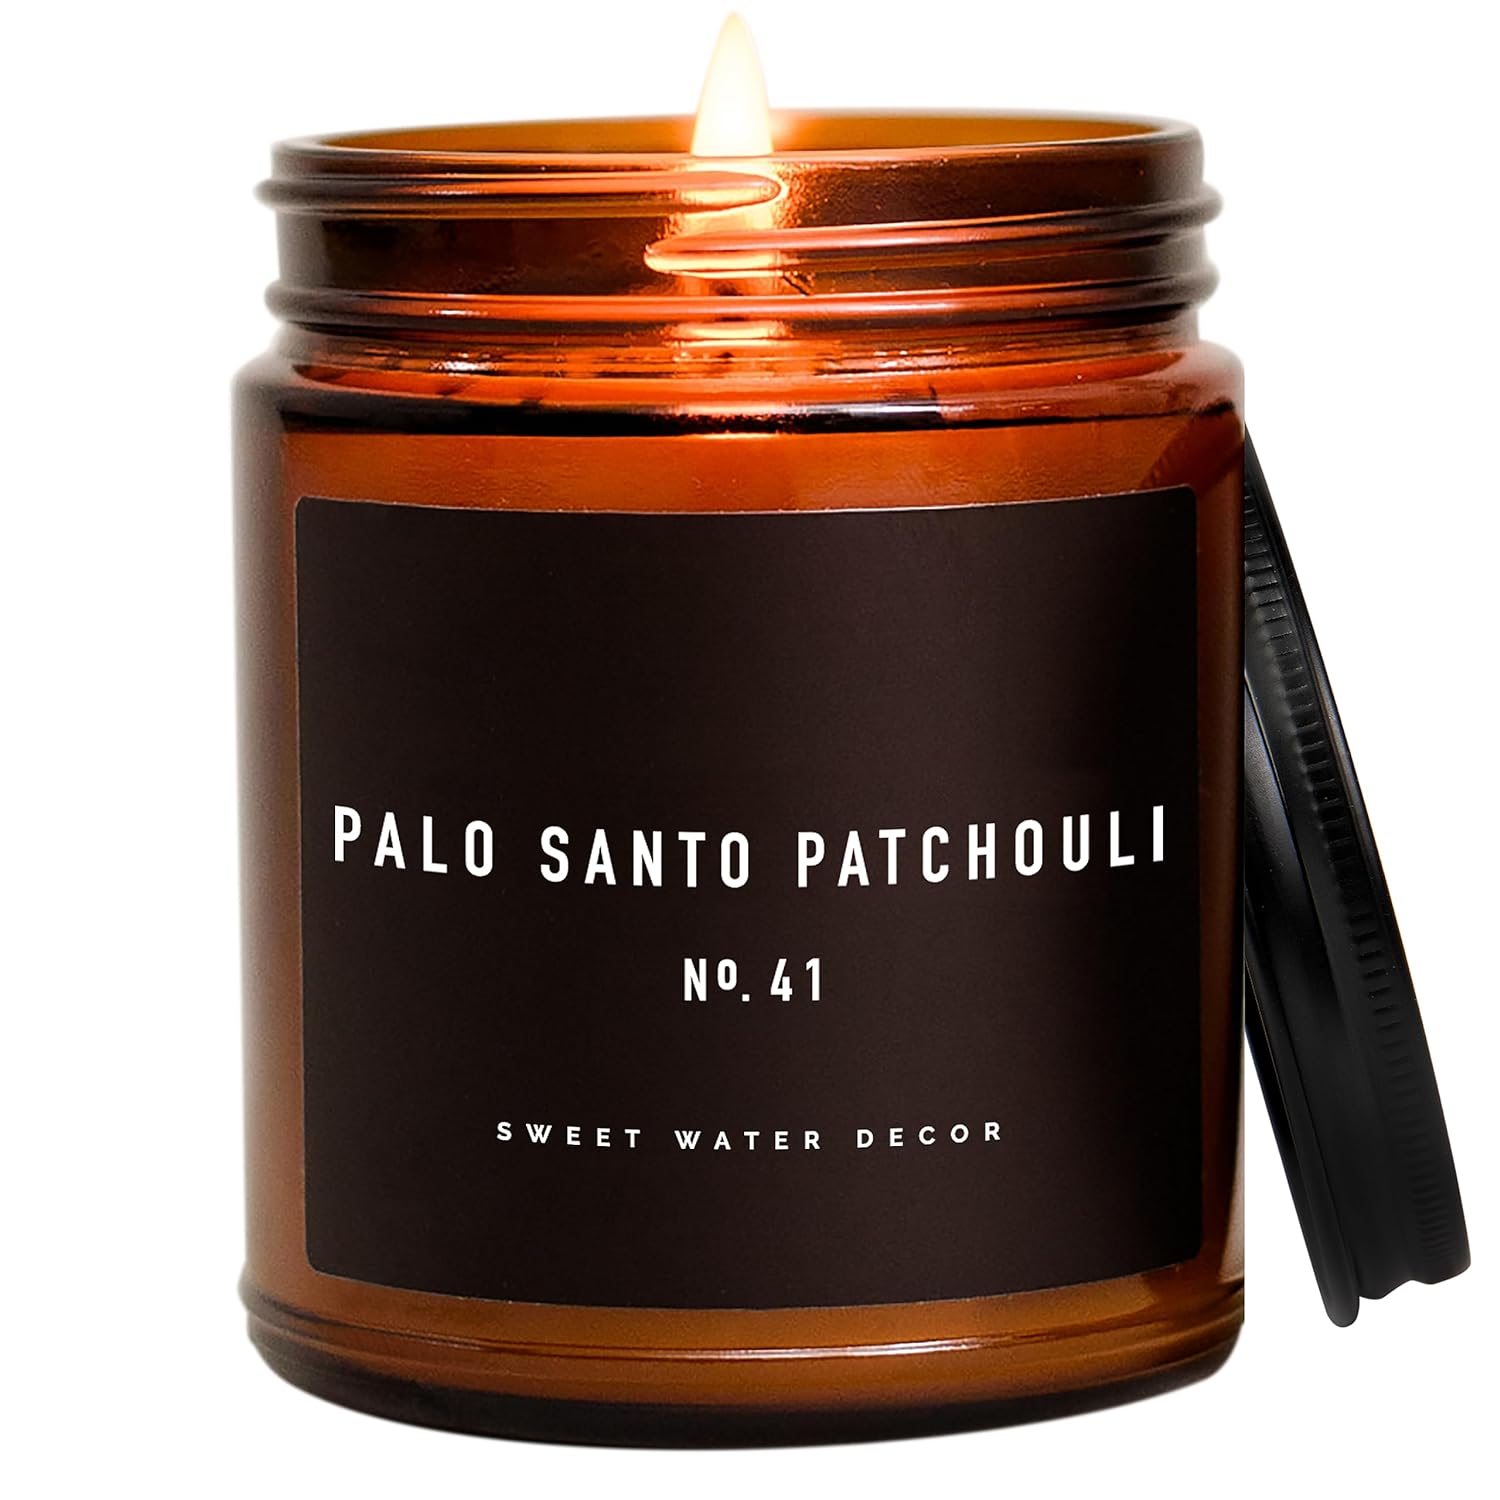 Sweet Water Decor Palo Santo Patchouli Candle | Vanilla, Musk, Sandalwood, Patchouli Scented Soy Candles for Home | Gifts for Women, Men, Housewarming | 9oz Amber Jar, 40 Hour Burn Time